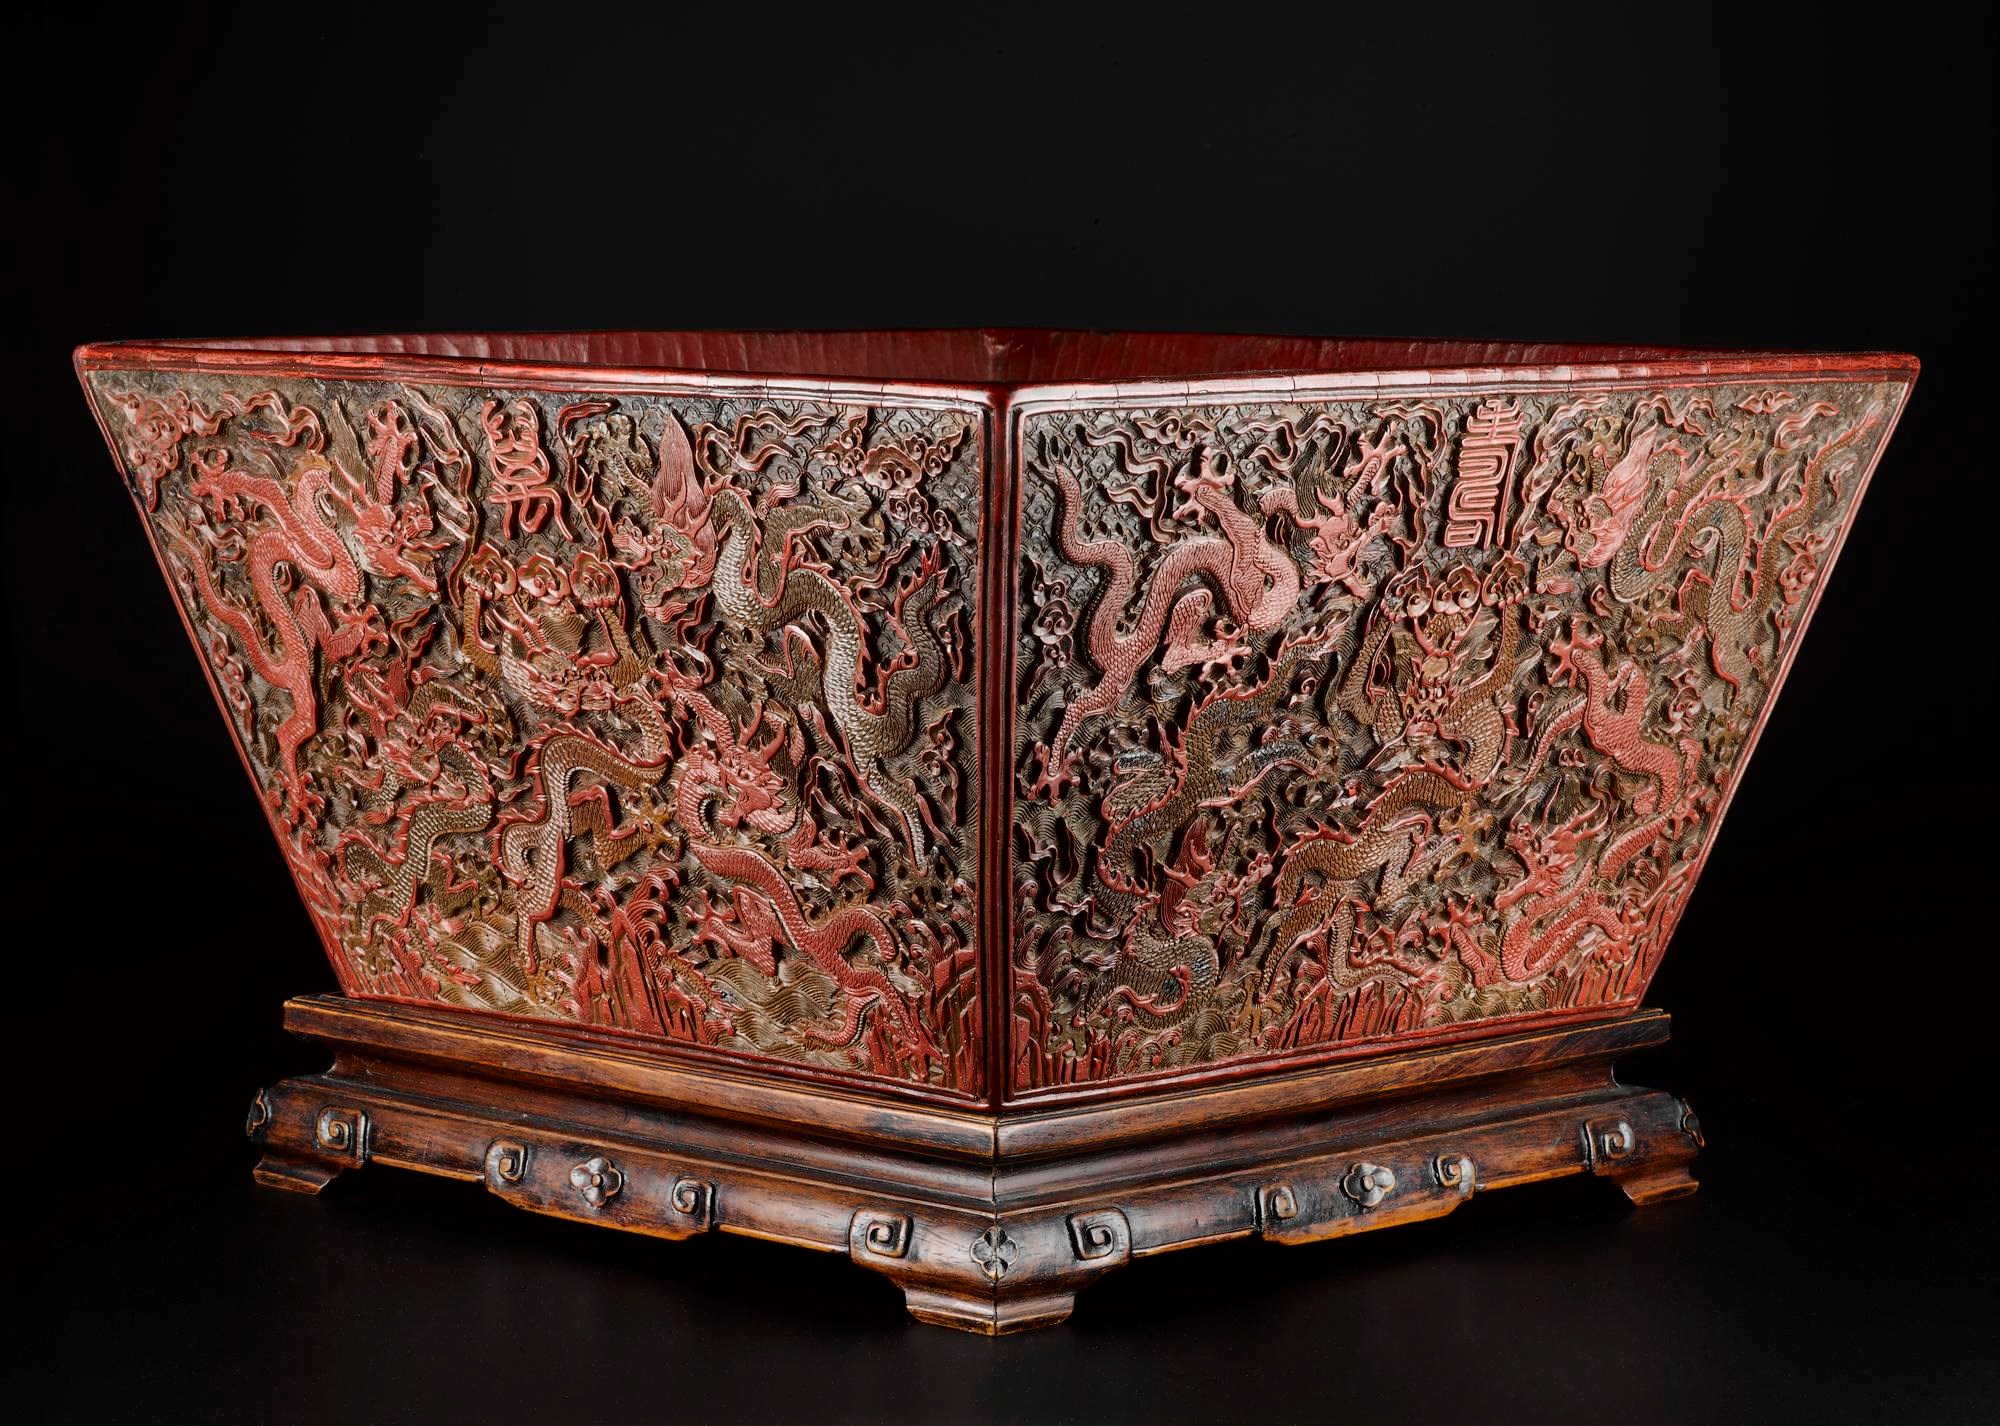 Rice measure of carved red, green and brown lacquer, square and decorated with five-clawed dragons in clouds above mountains and sea, with reign mark on base, and with wooden stand: China, Ming Dynasty, Jiajing reign, 1521-1567 AD.